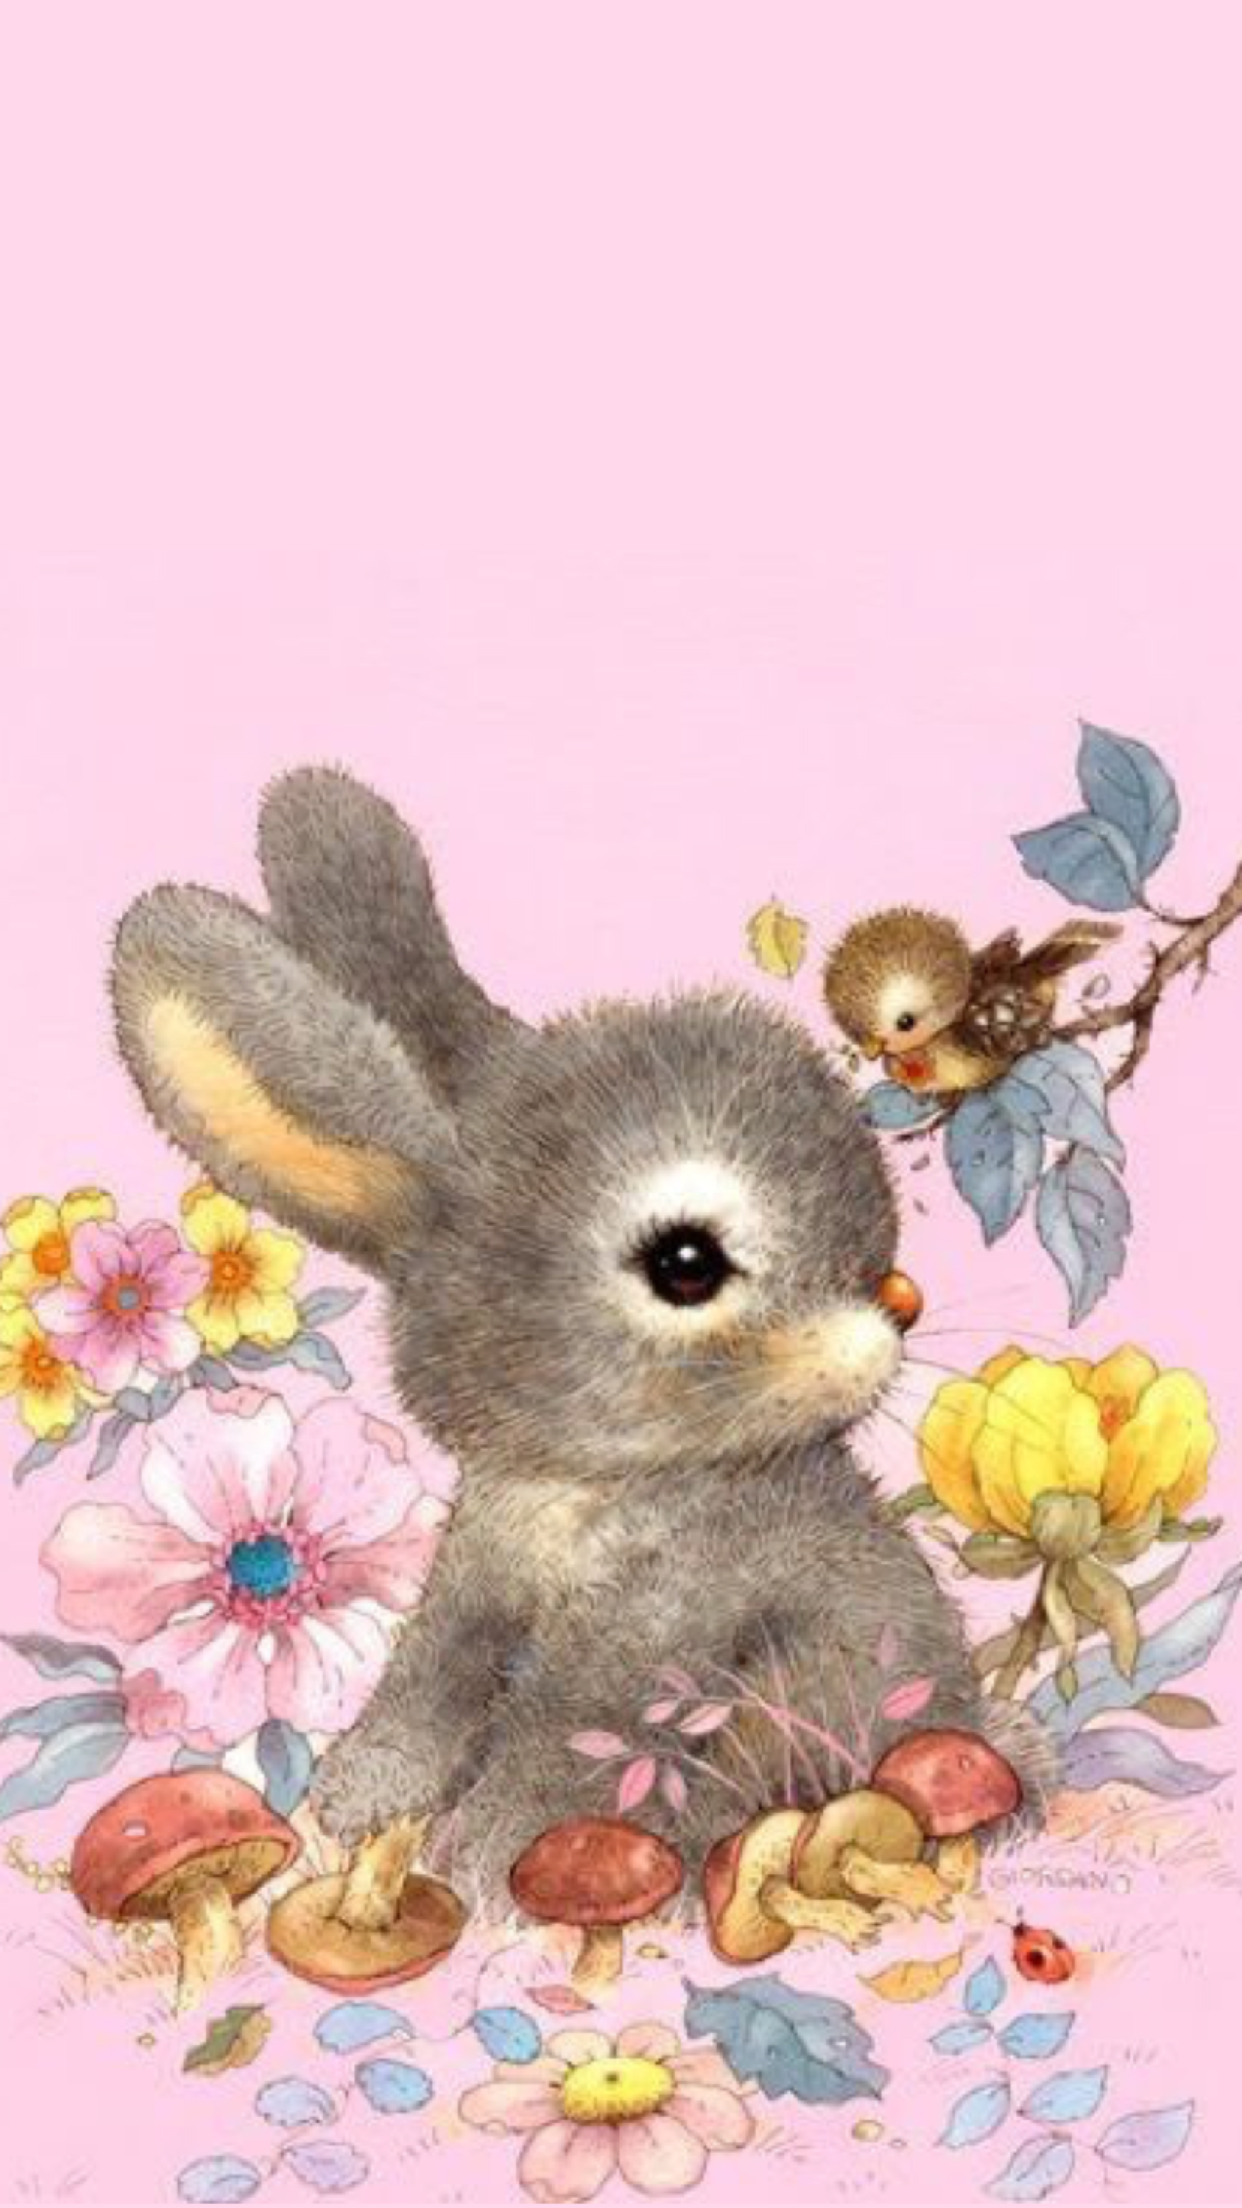 Cute Bunny iPhone Wallpaper Free Cute Bunny iPhone Background